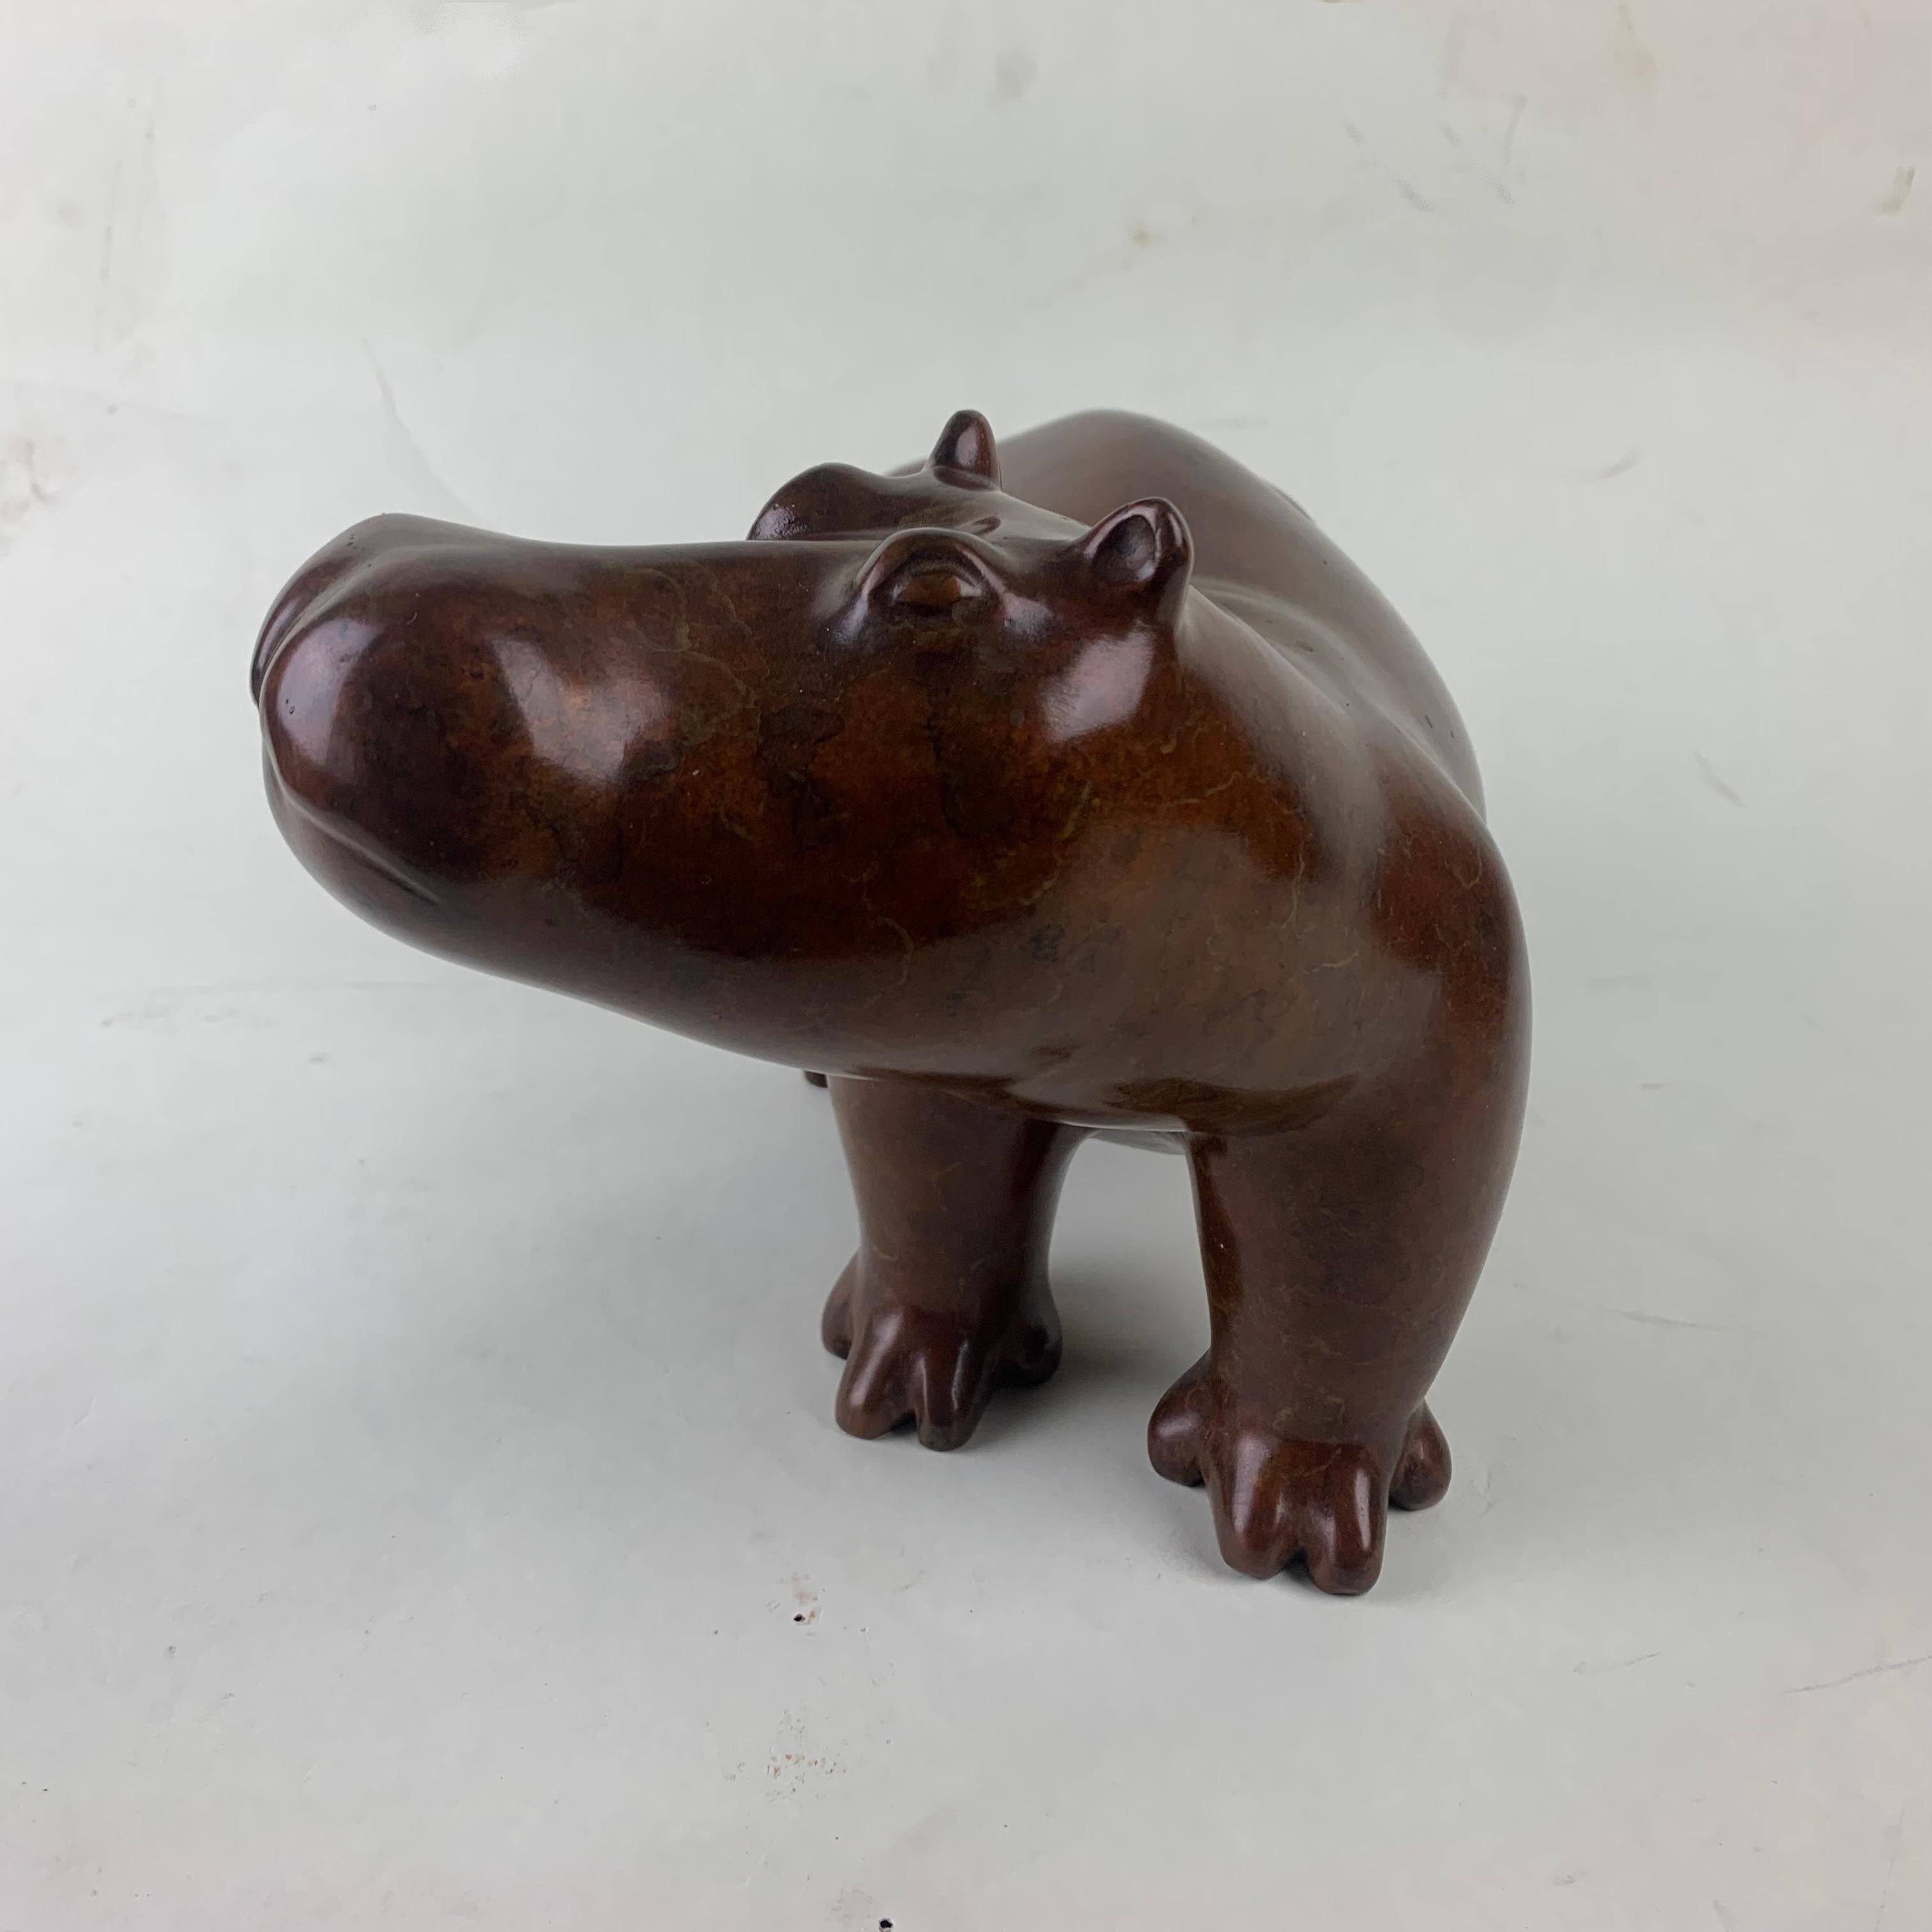 Modern cold painted bronze figure of a Hippopotamus by Anita Mandl F.R.B.S., R.W.A., born 1926, signed with monogram, with mottled brown patina.